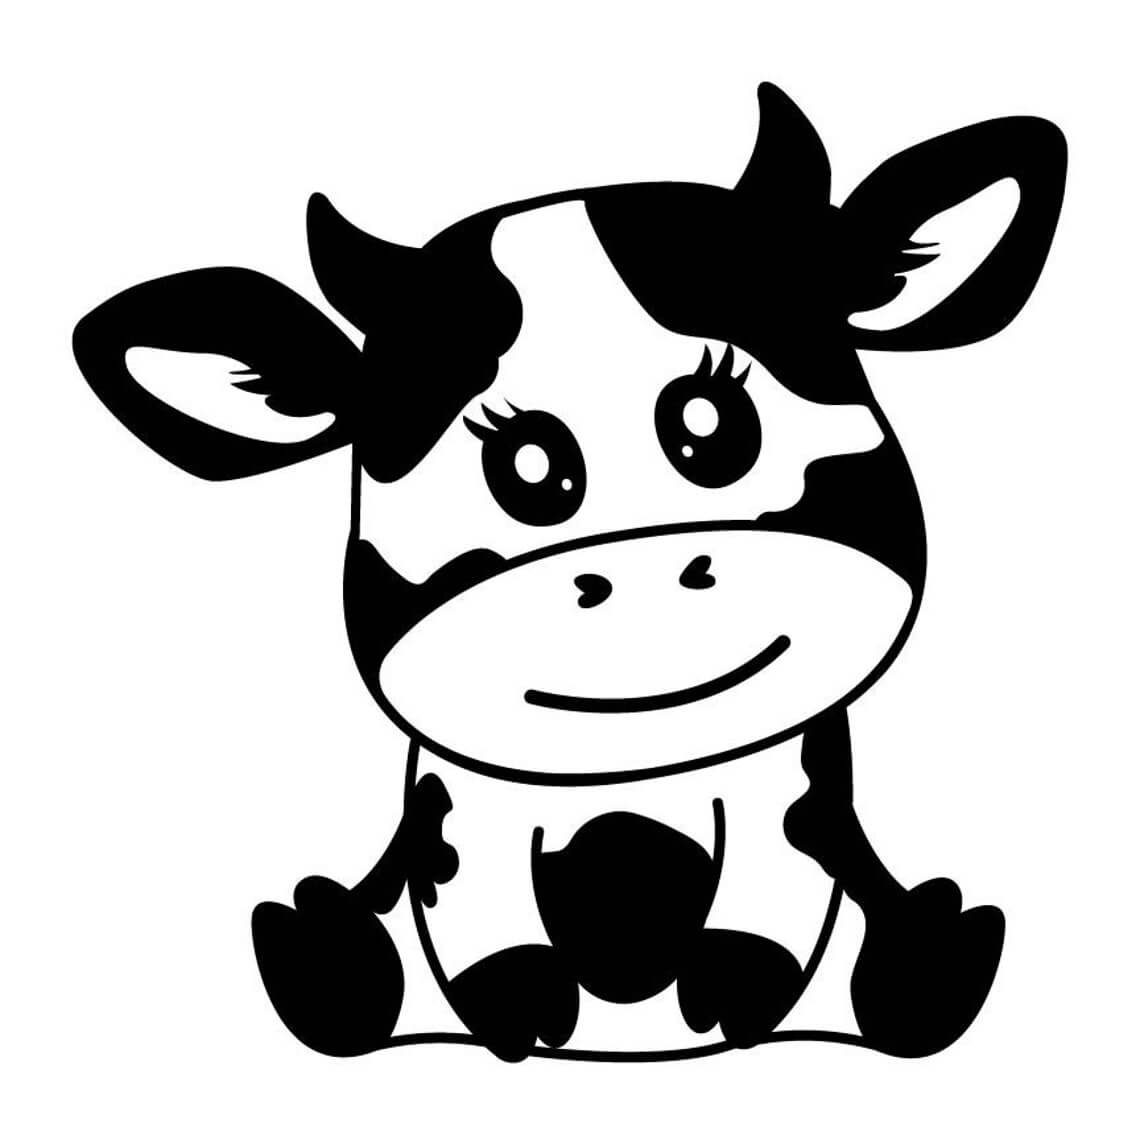 Cute little cow baby picture.